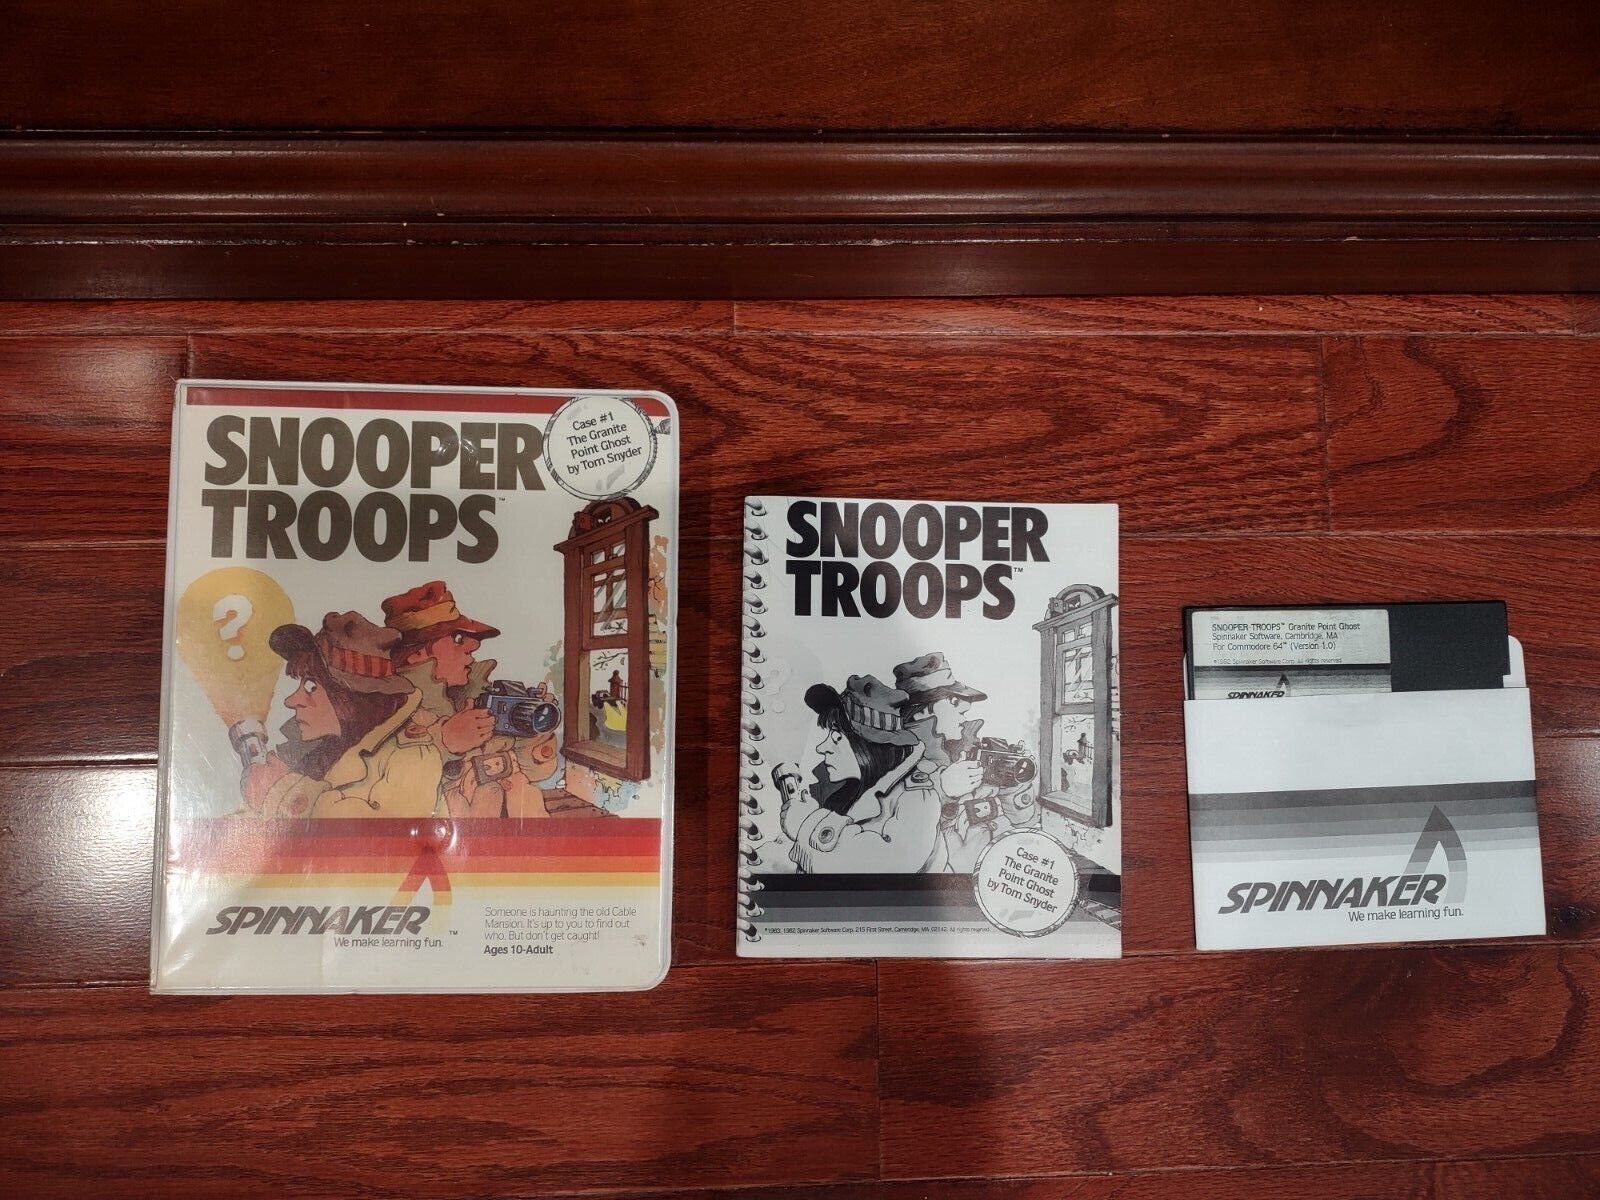 Spinnaker Snooper Troops Game for Commodore 64 on 5,25 Disk